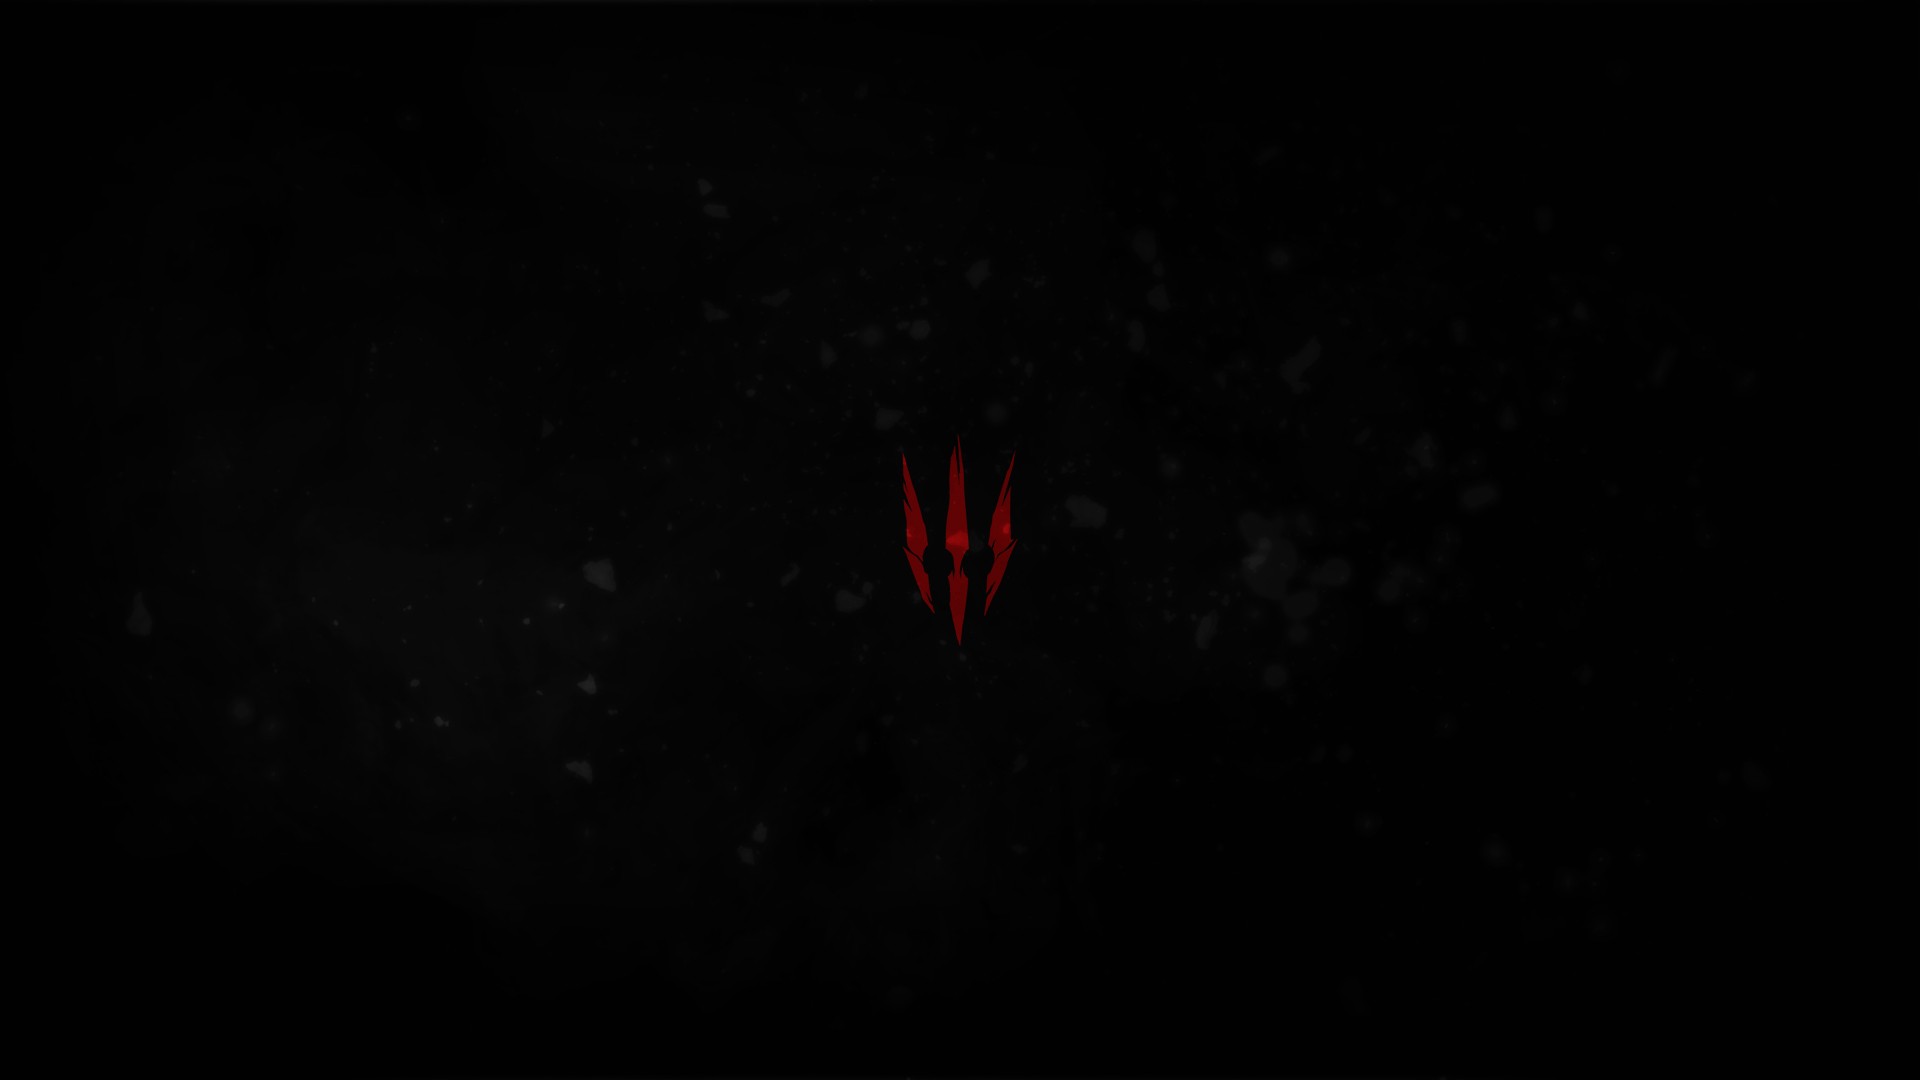 General 1920x1080 video games The Witcher 3: Wild Hunt minimalism simple background red black background RPG PC gaming